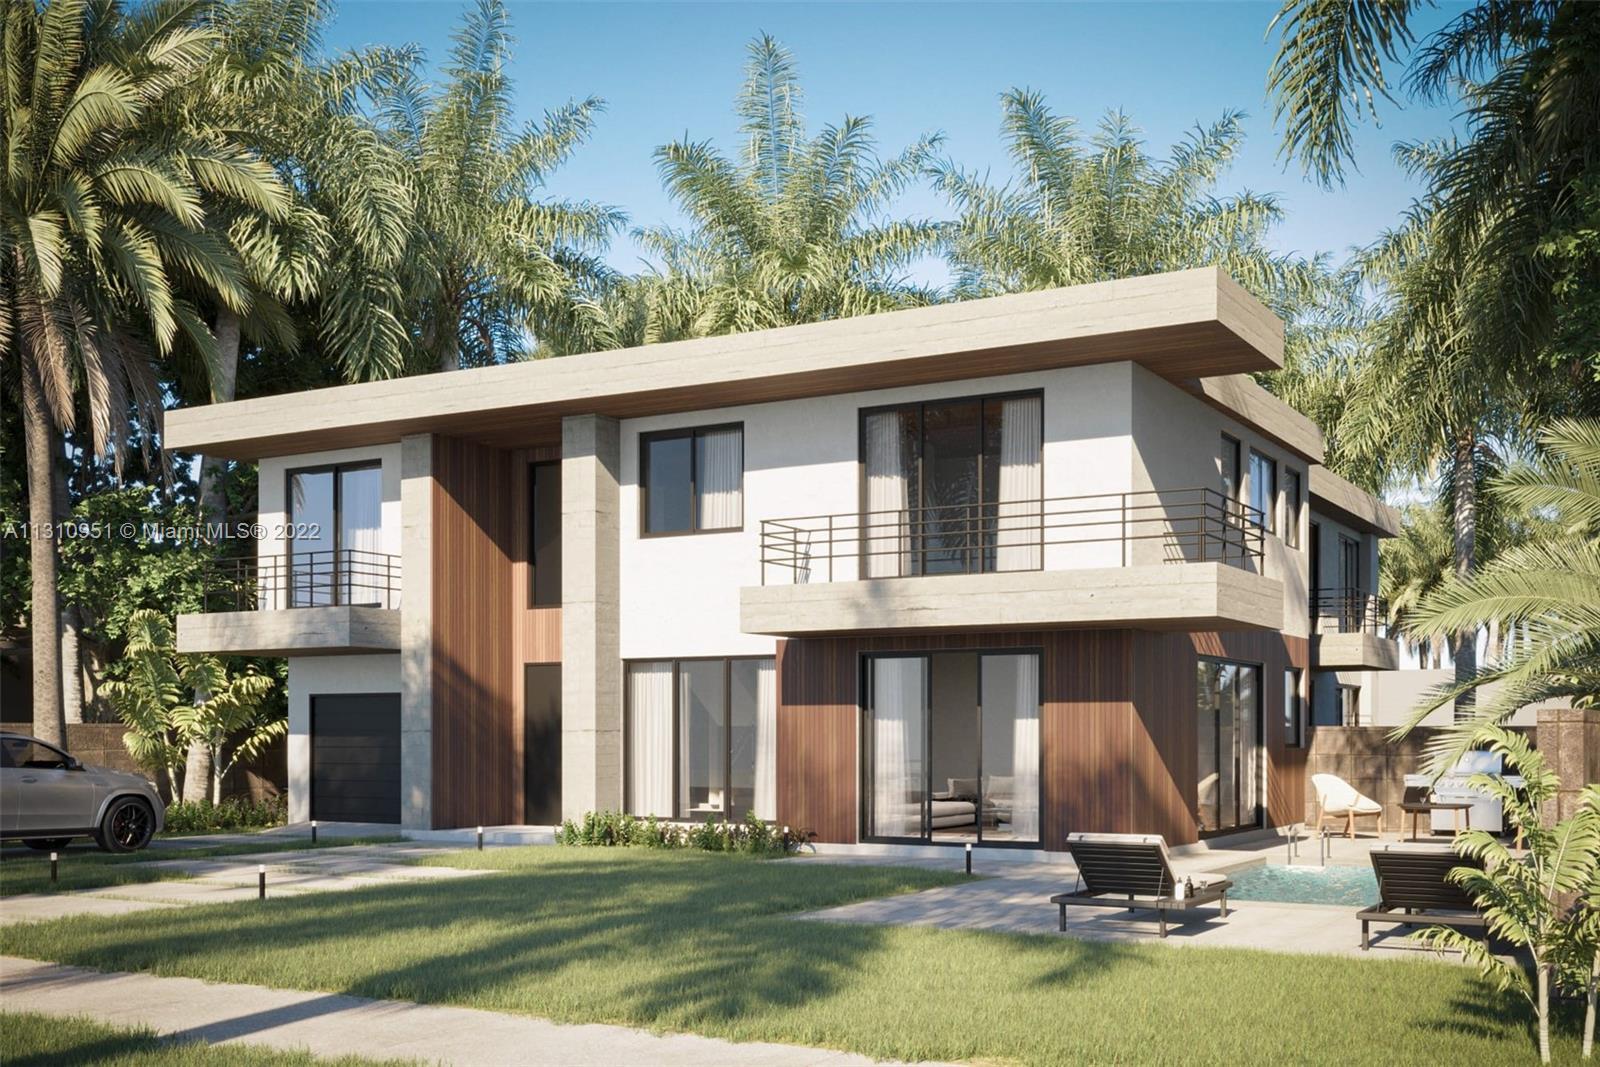 New Construction. Expected completion Q2 2023. Two modern attached single family homes in Tarpon Riv